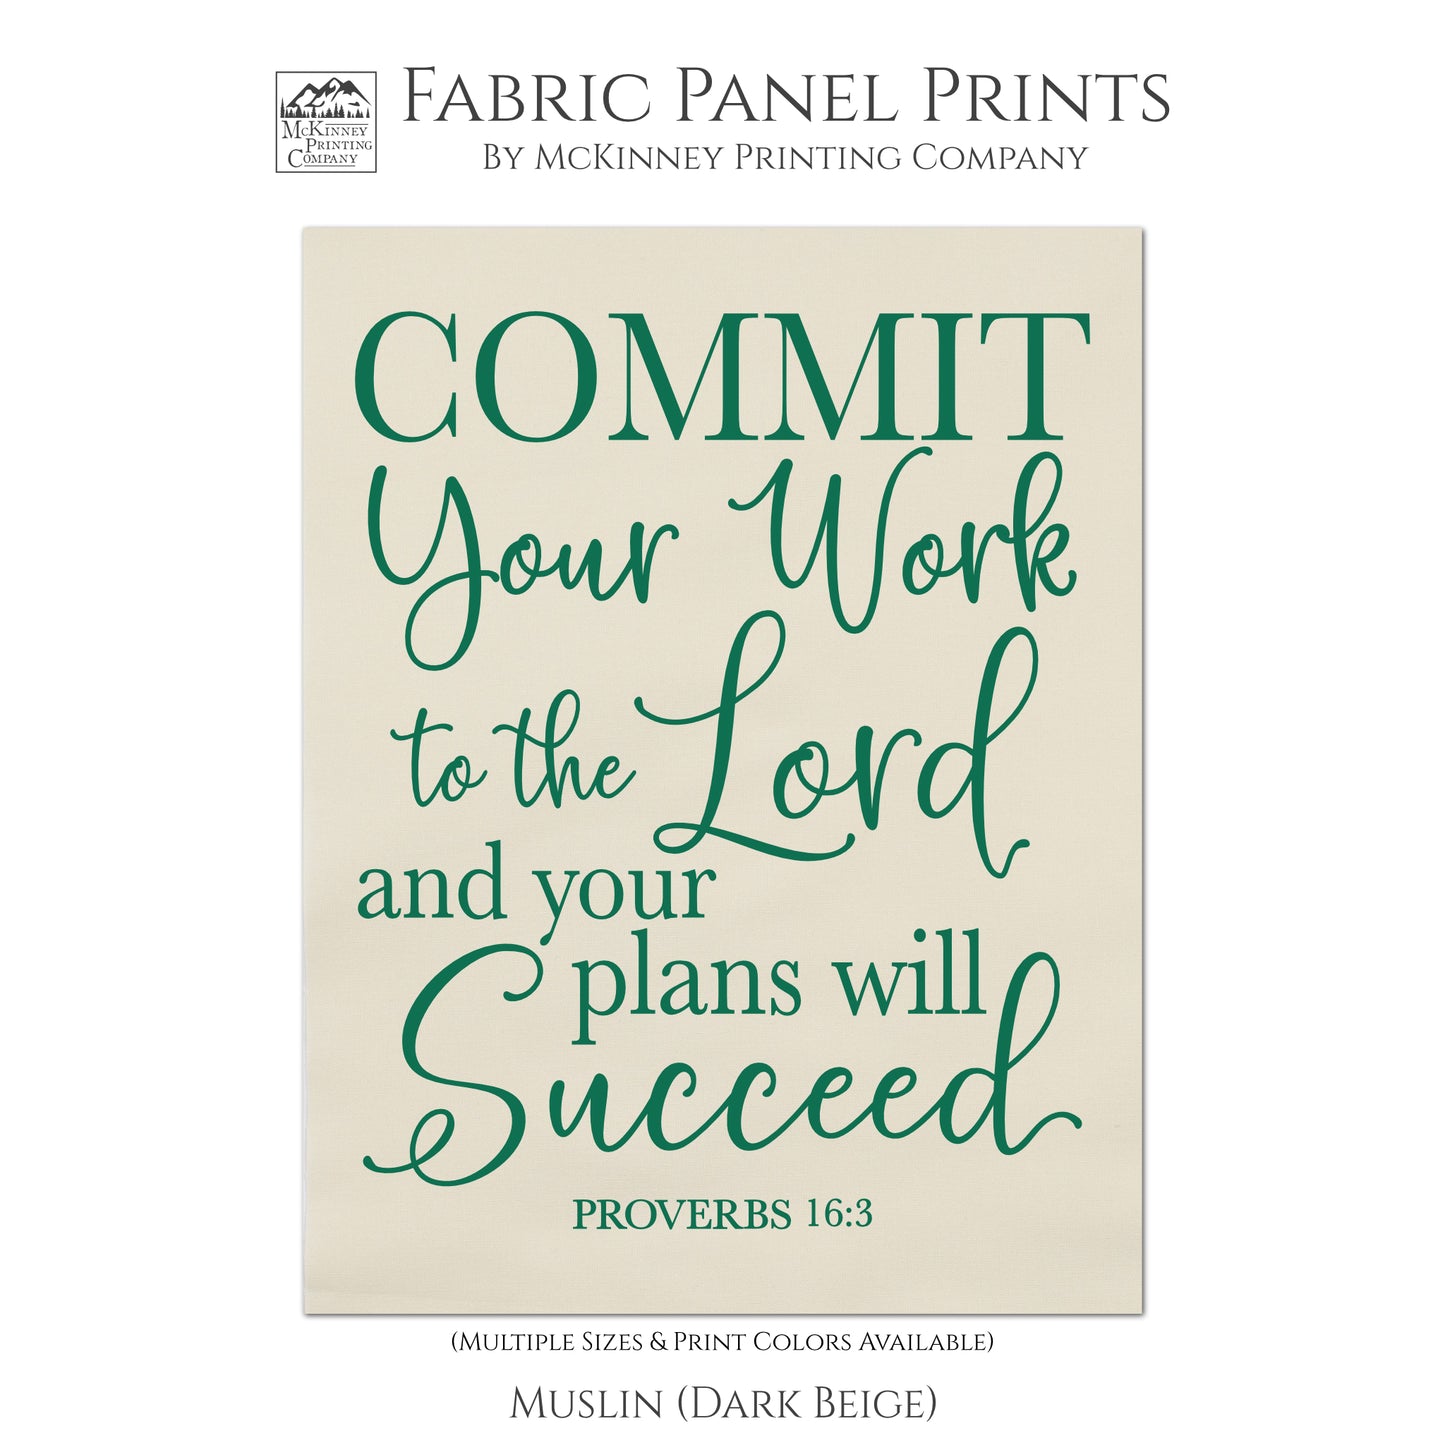 Commit you work to the Lord and you plans will succeed. - Proverbs 16:3, Fabric Panel Print, Quilt Block, Scripture Fabric - Muslin